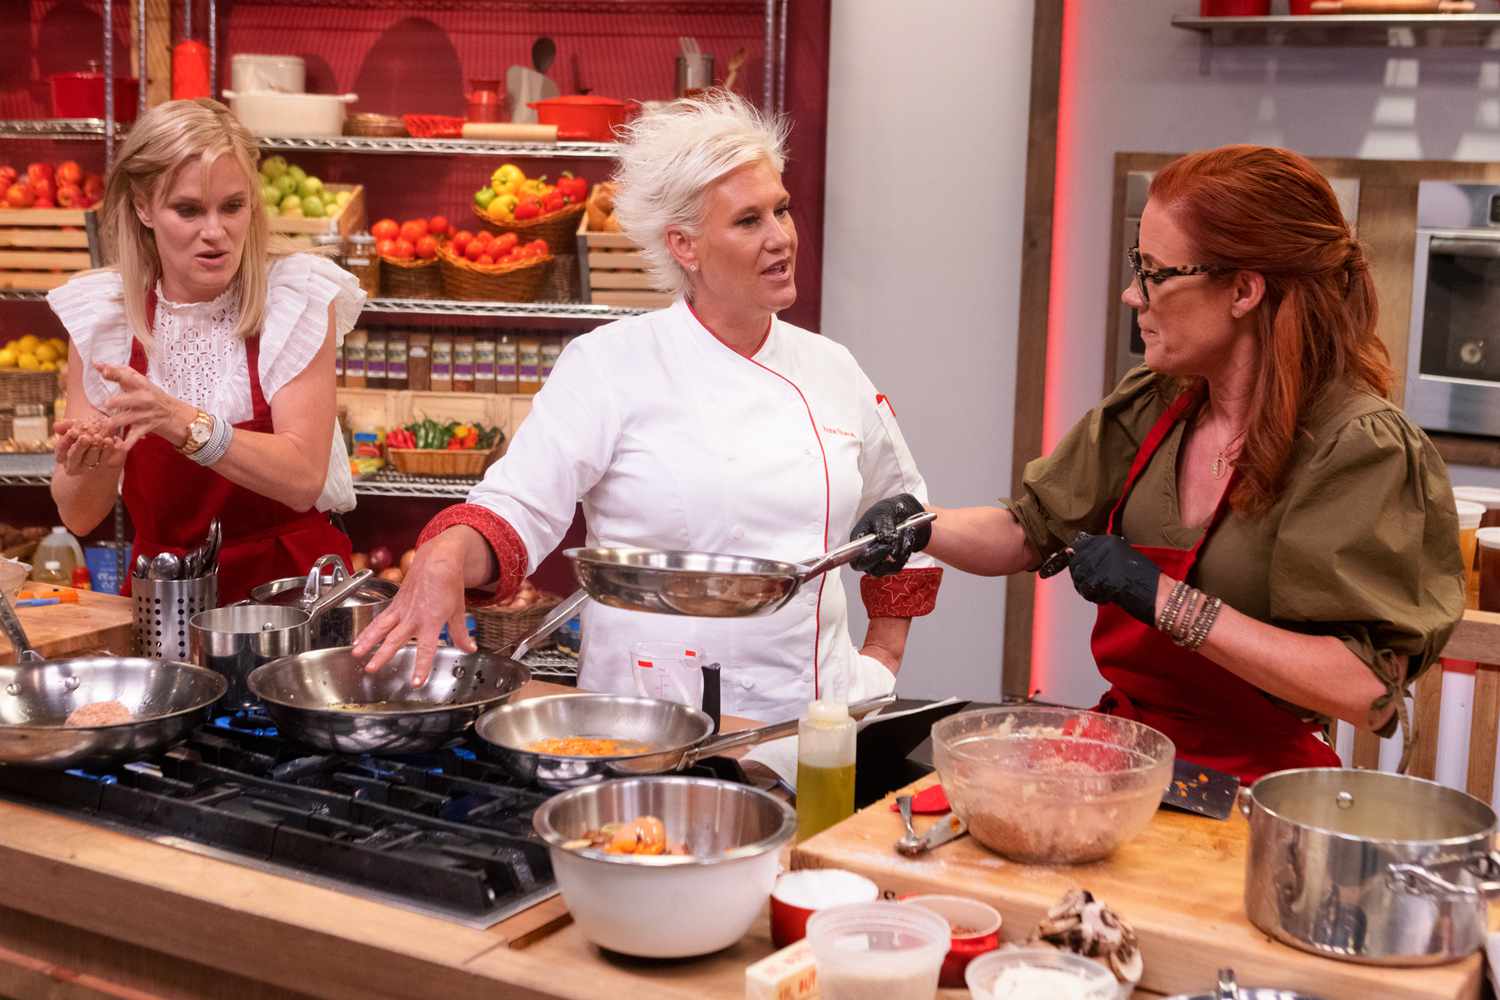 Mentor Anne Burrell checks in on red team recruits Nicholle Tom and Elisa Donovan as they cook during the main dish challenge, as seen on Worst Cooks in America, Season 23.